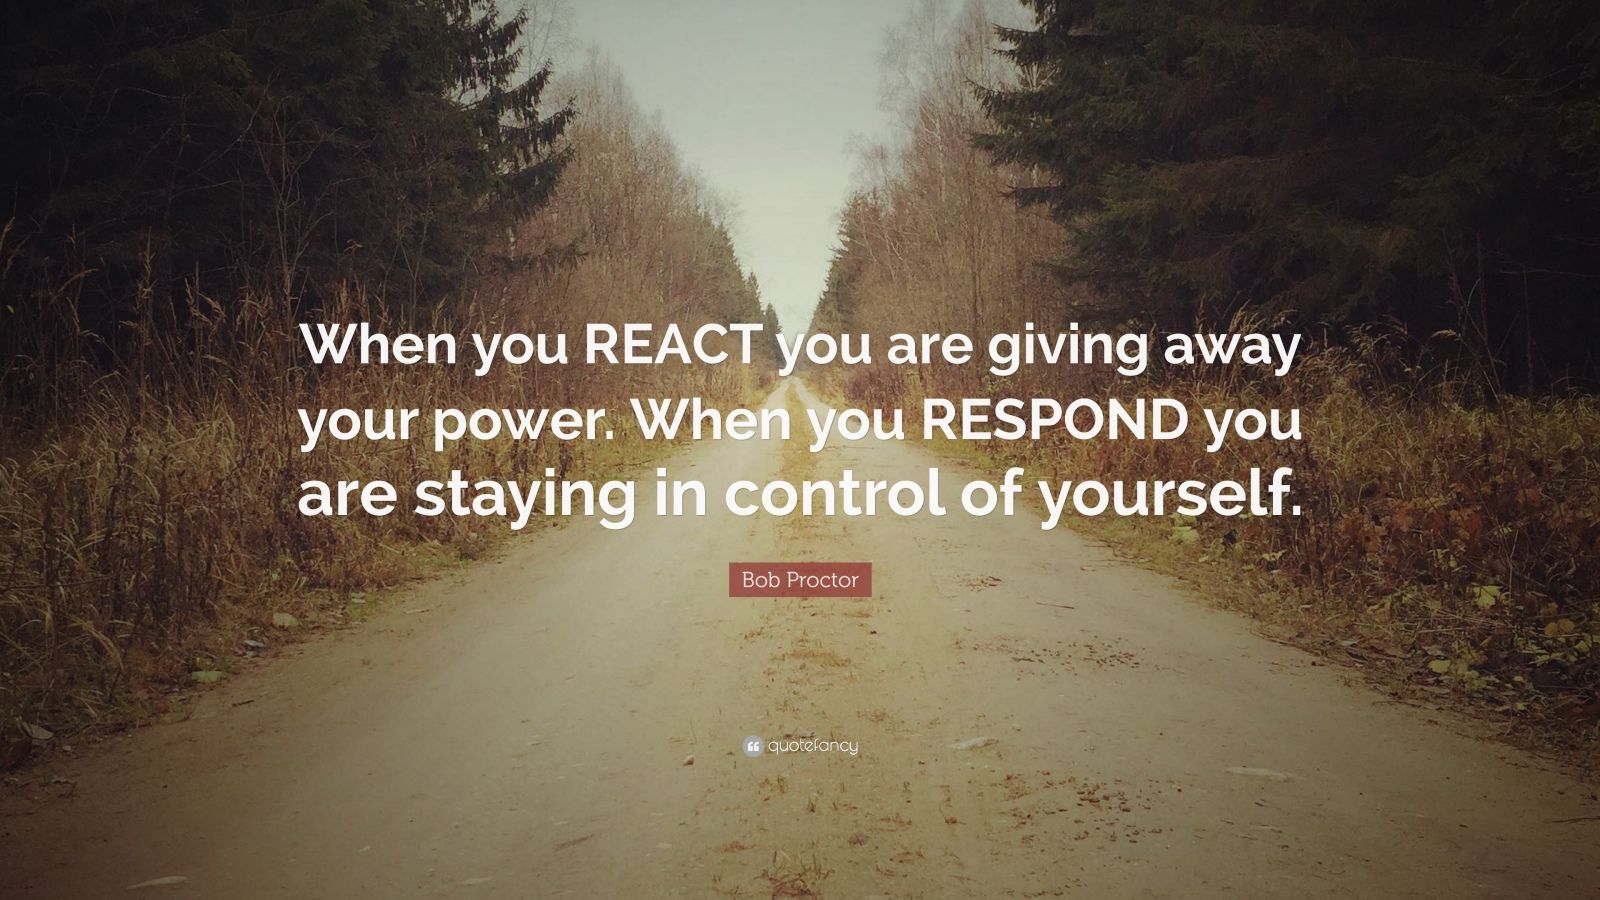 Bob Proctor Quote: “When you REACT you are giving away your power